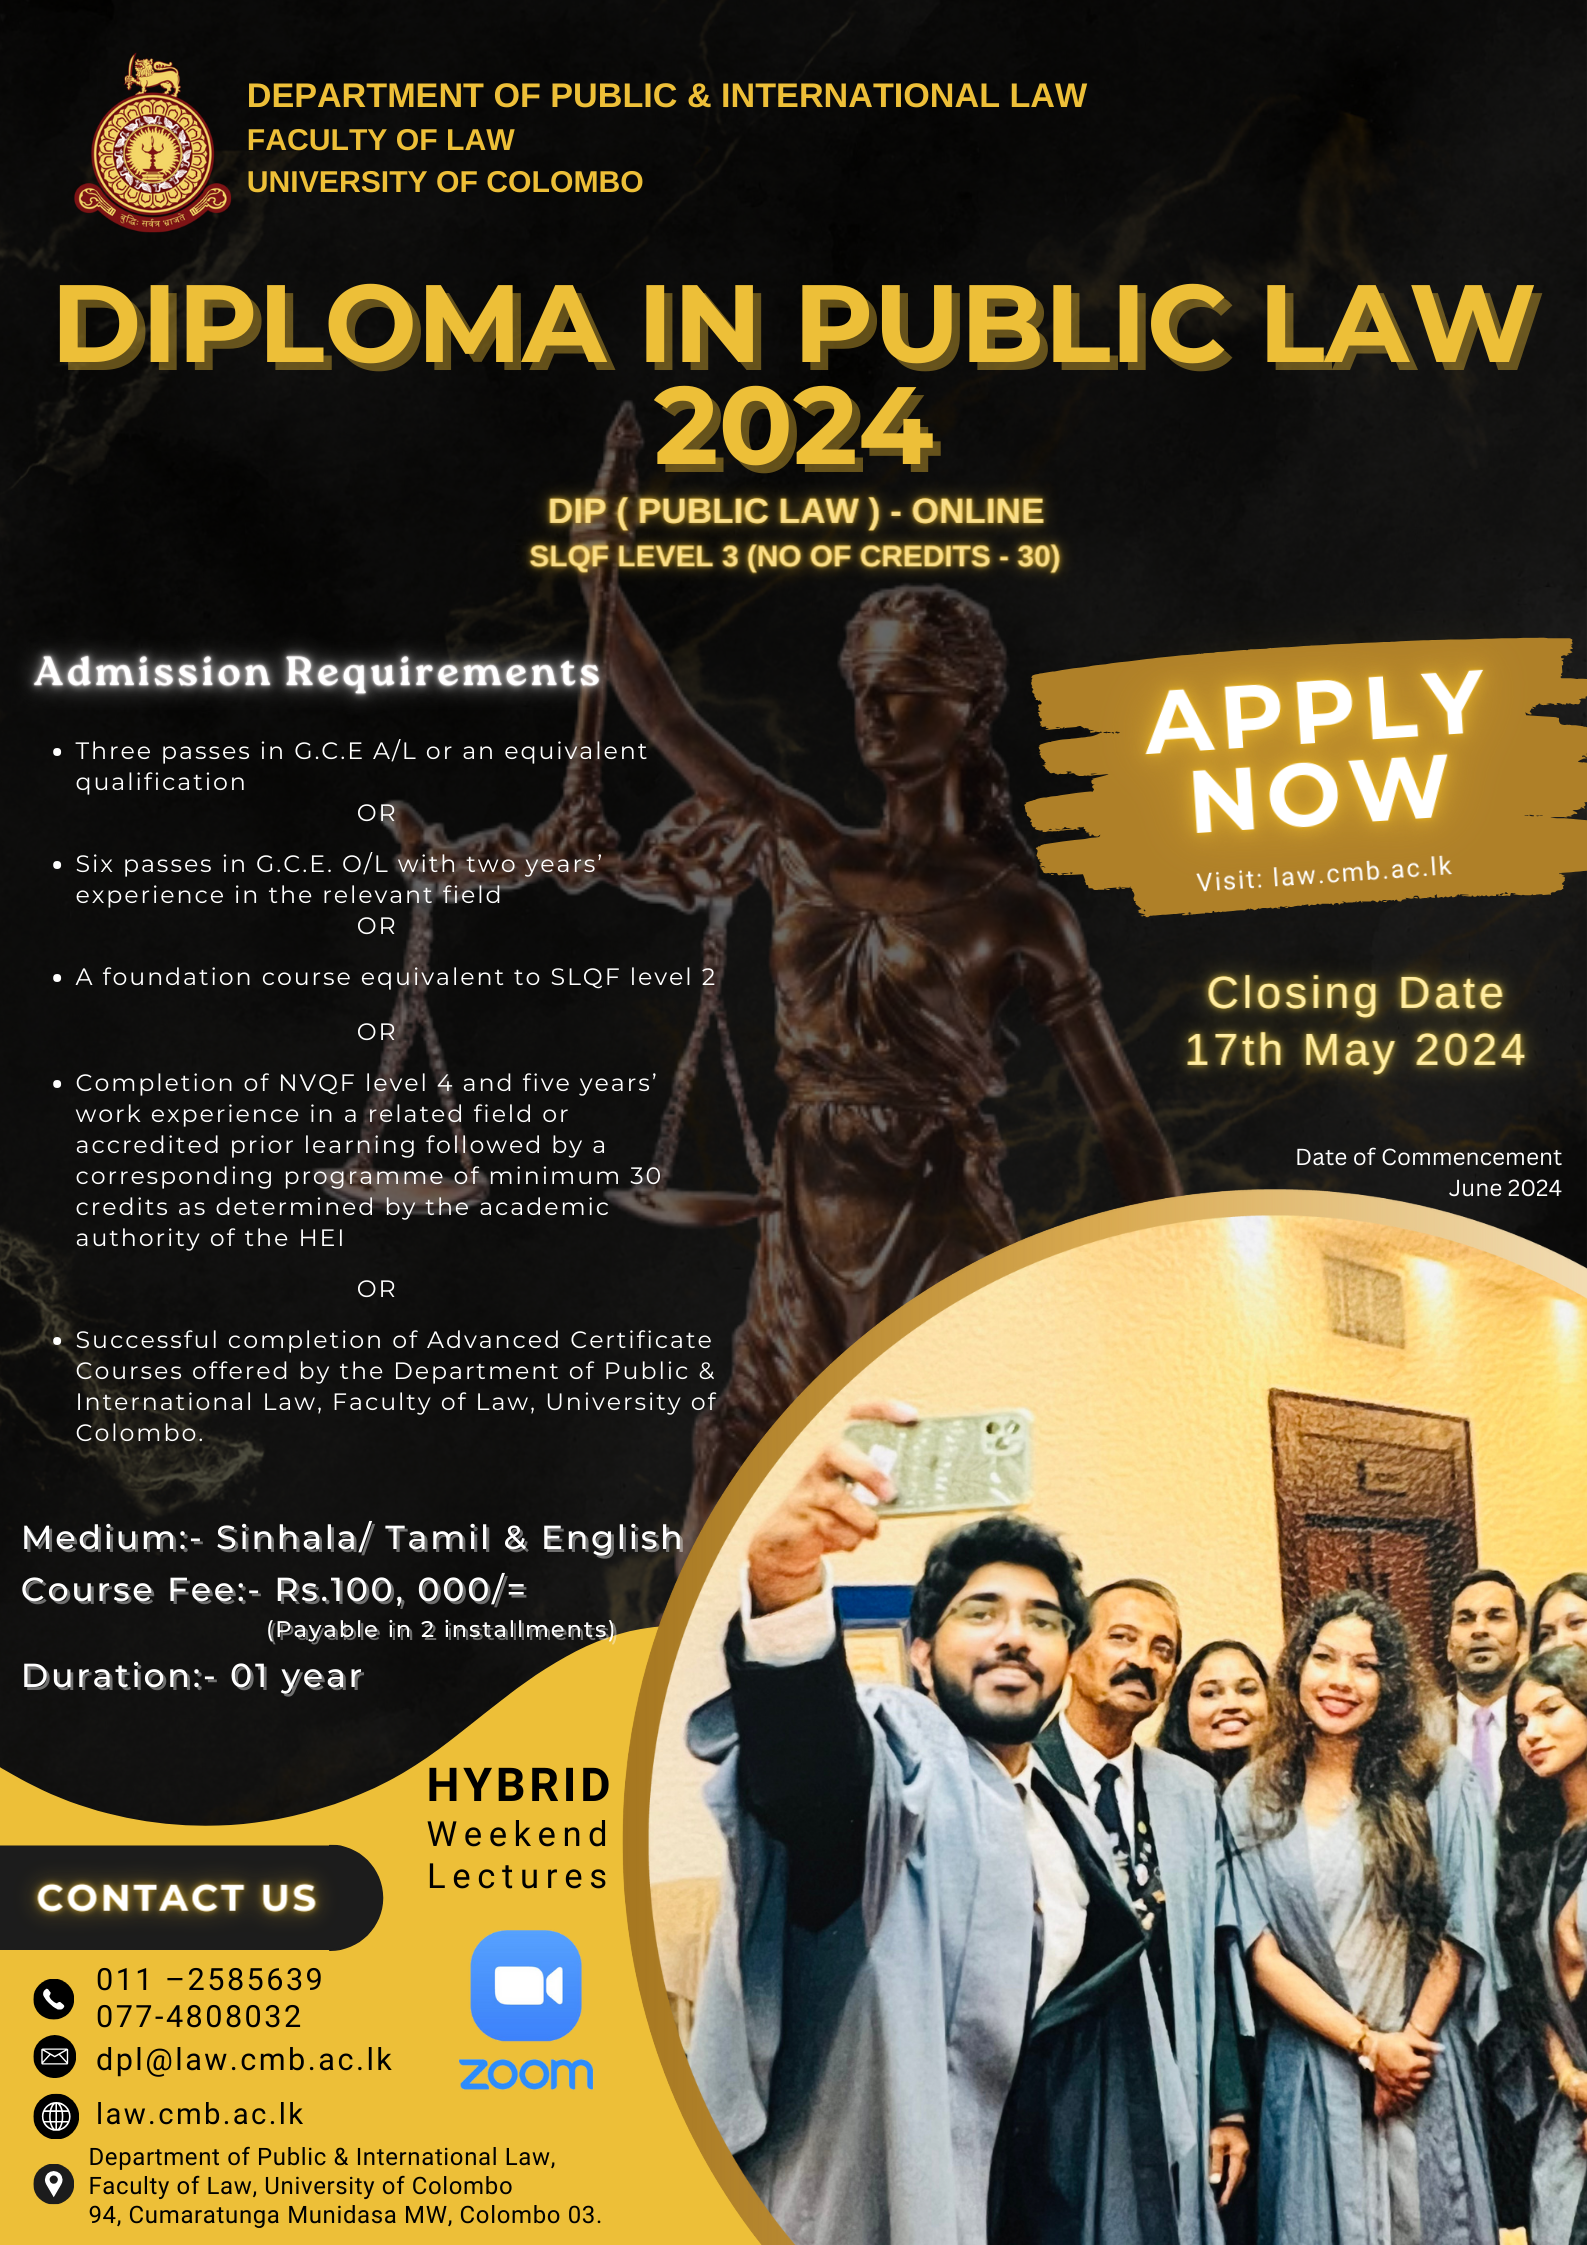 Diploma in Public Law (Intake 2024) - Faculty of Law, University of Colombo